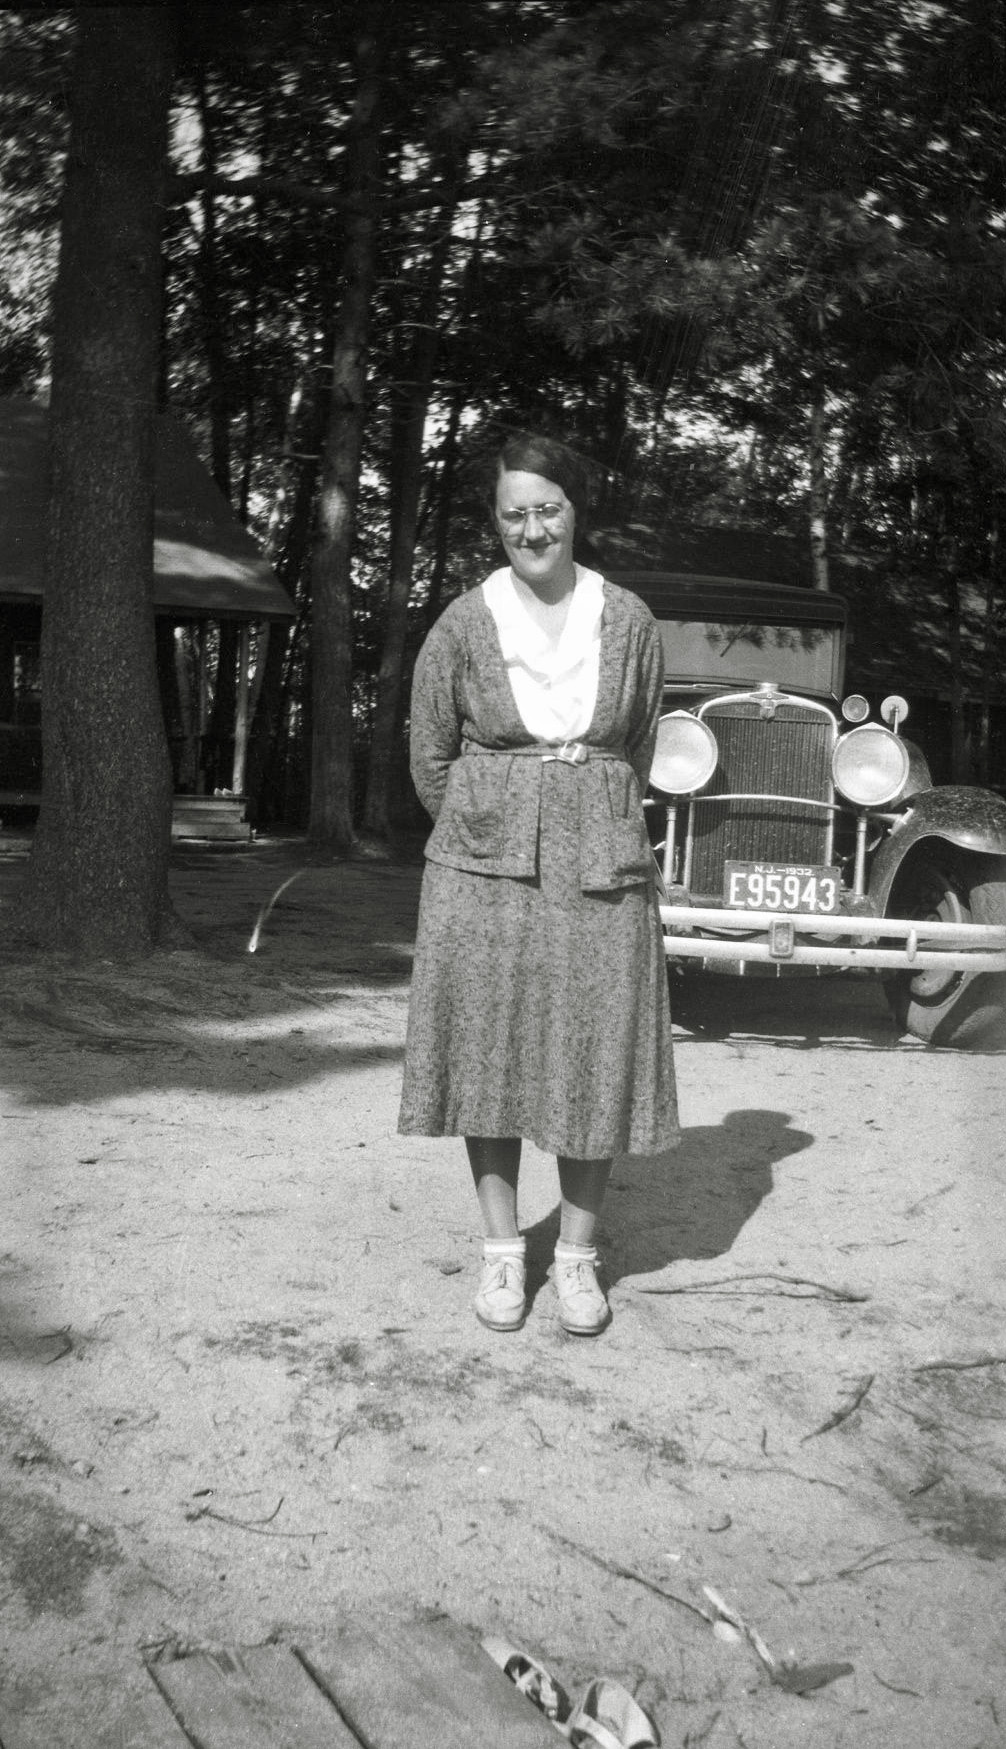 Going by the date on the car license plate this was taken in 1932. Sadly I have no other information on who this is or where taken. Can anyone ID the car? I'm stumped. From my negatives collection. View full size.

[The car is a Nash, about 1931. -tterrace]